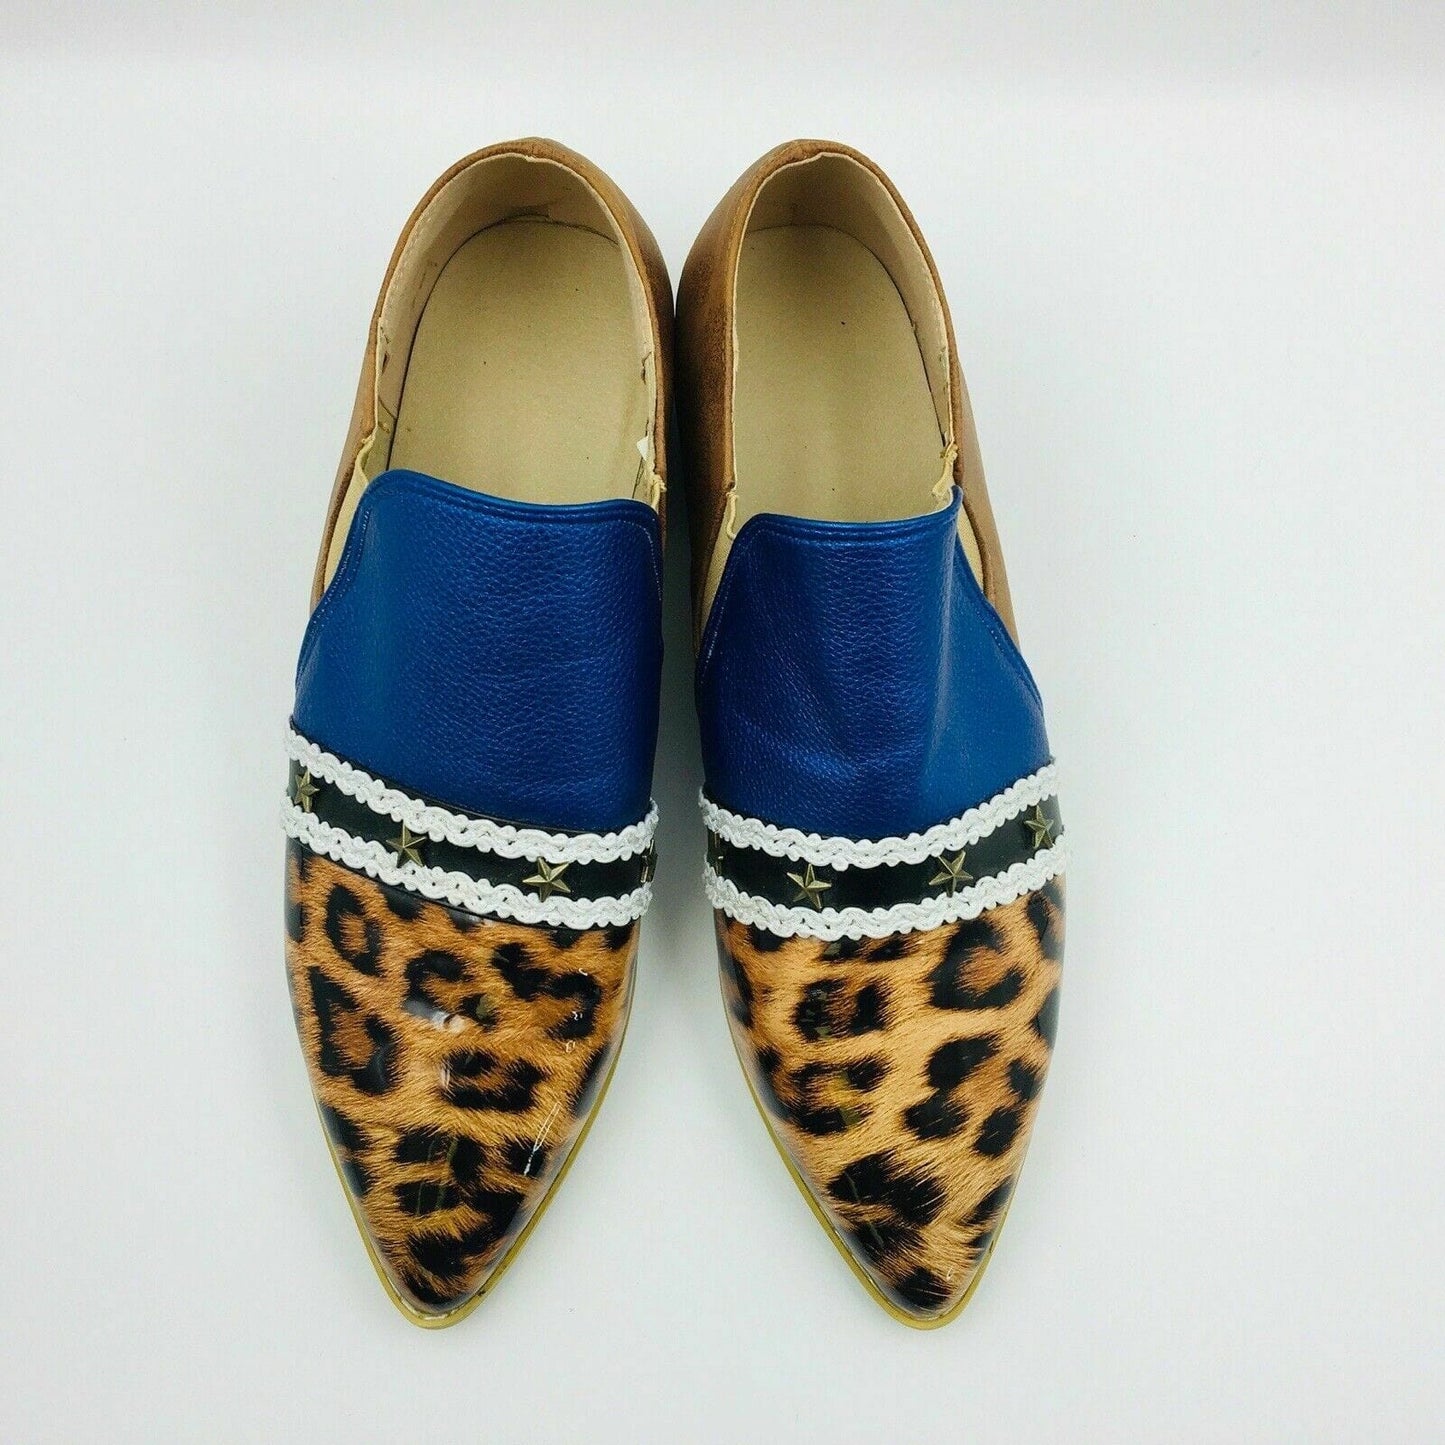 Womens Fashion Size 9 Blue Faux Leather Cheetah Suede Heeled Loafer Shoes